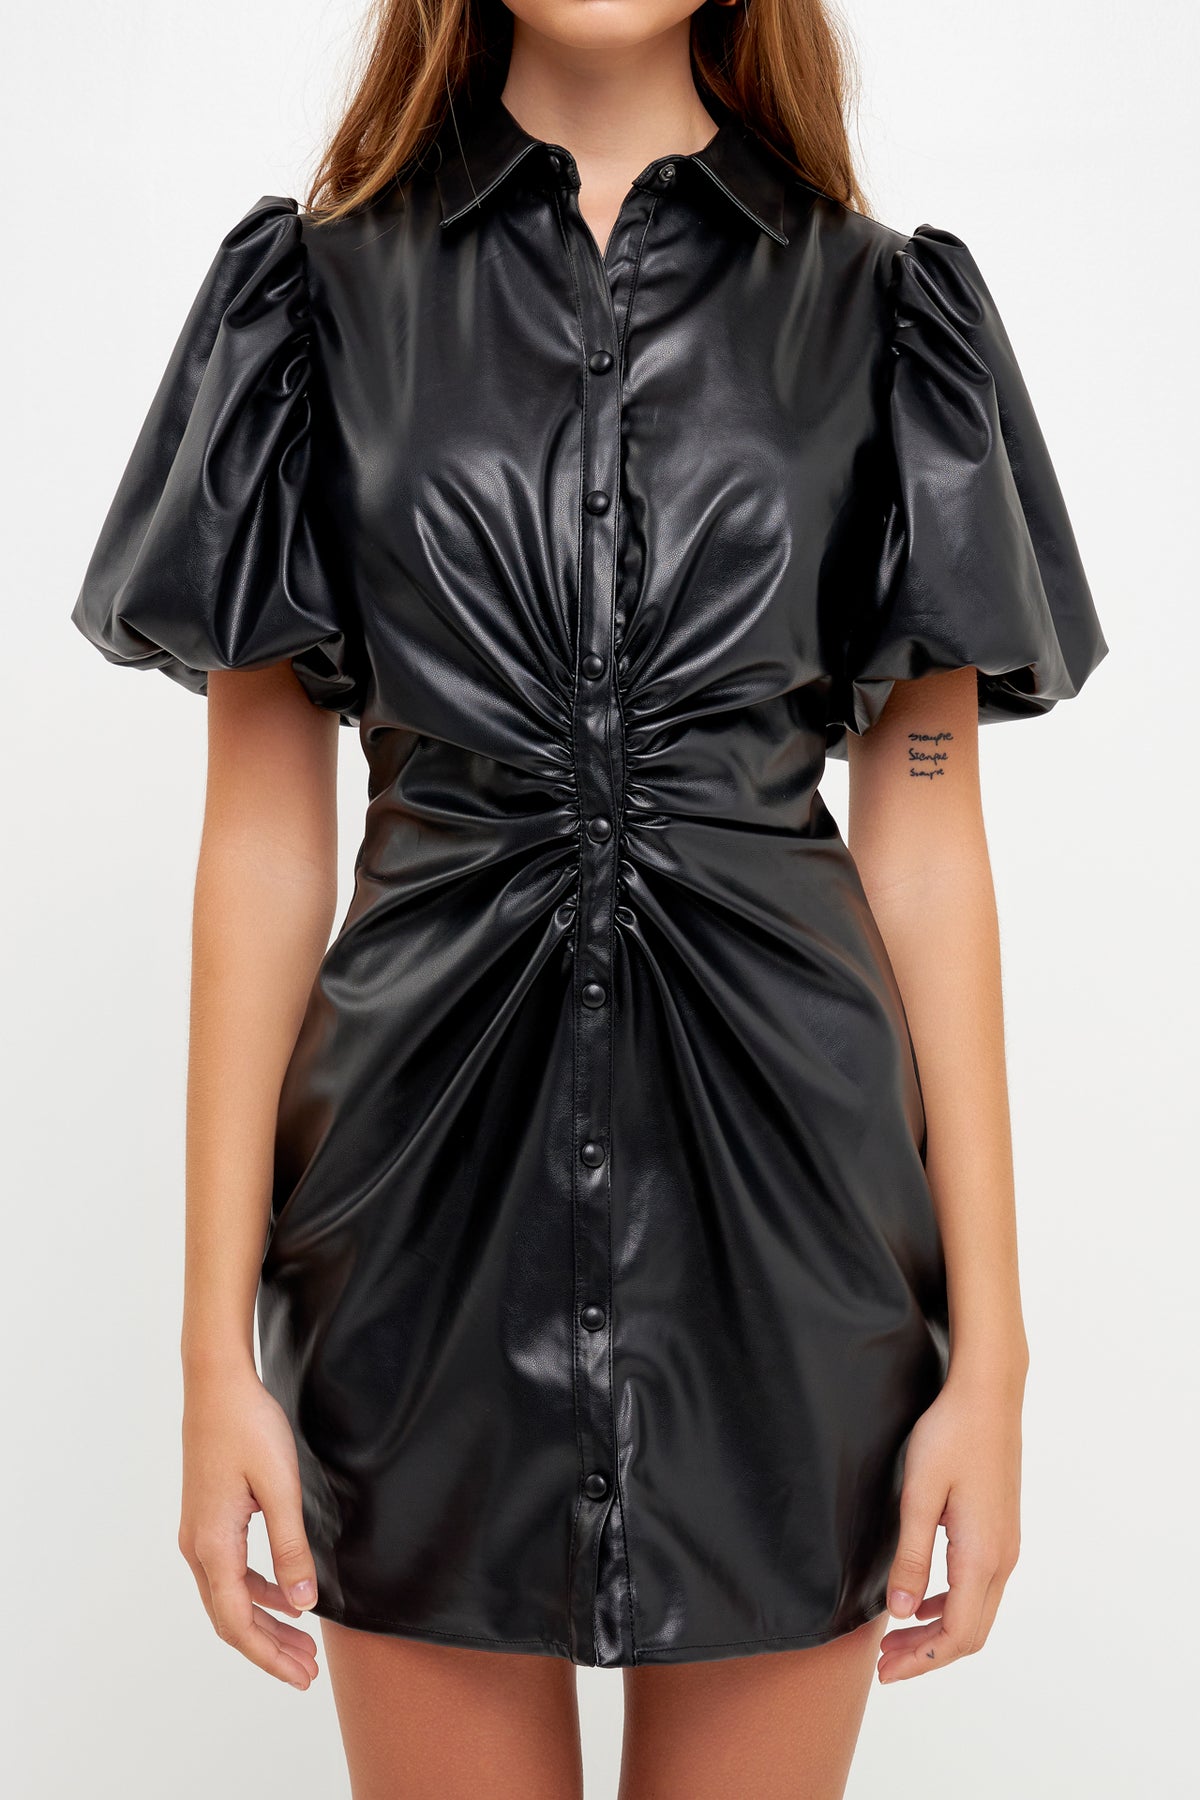 ENDLESS ROSE - Short-Sleeve Faux Leather Mini Dress - DRESSES available at Objectrare